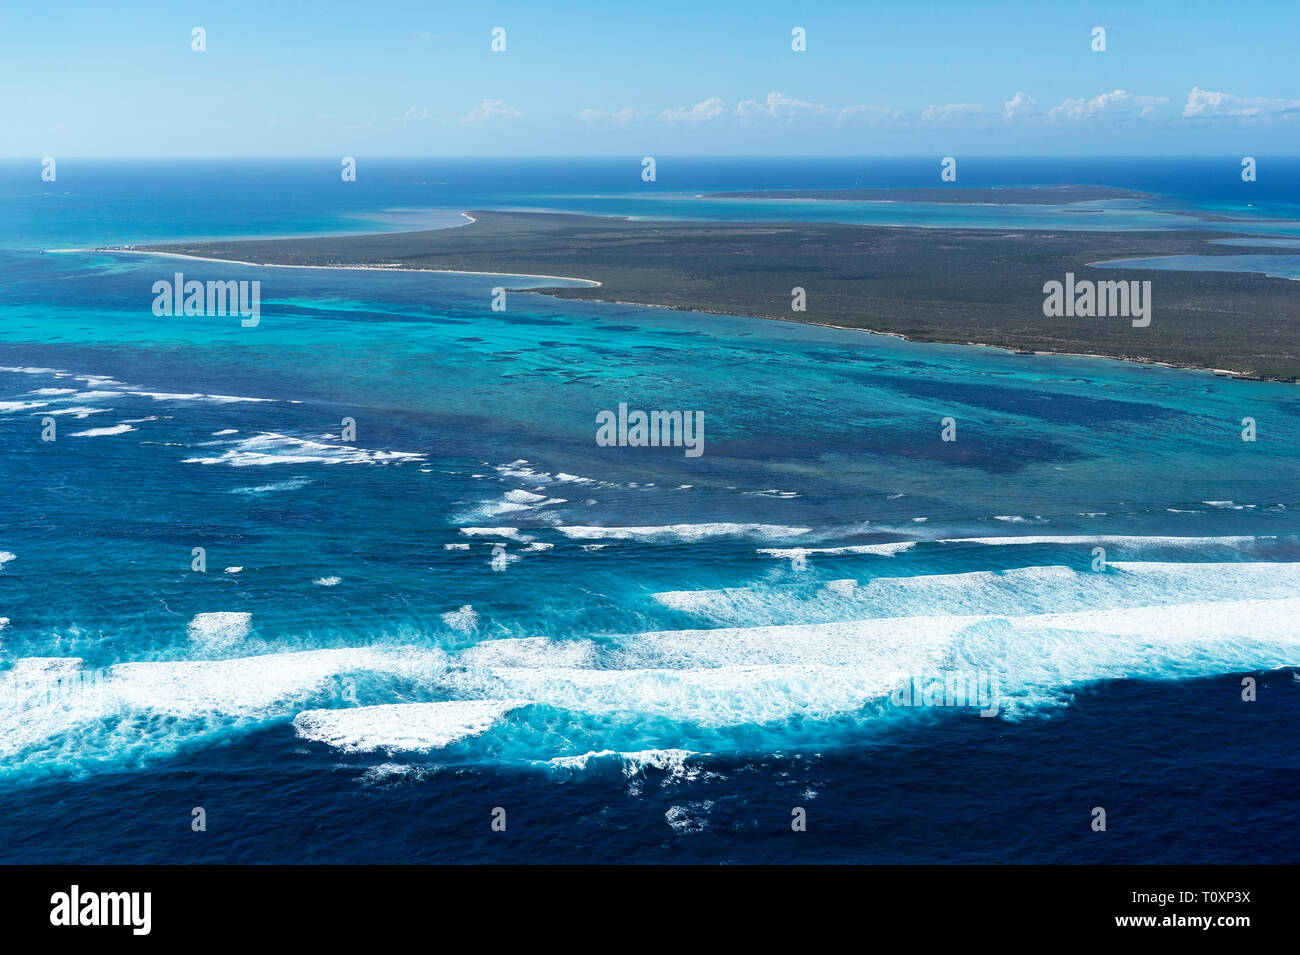 West Wallabi island in the Houtman Abrolhos as seen from the air. (Note: these images are not shot through glass, the plane door is off).   The Houtma Stock Photo